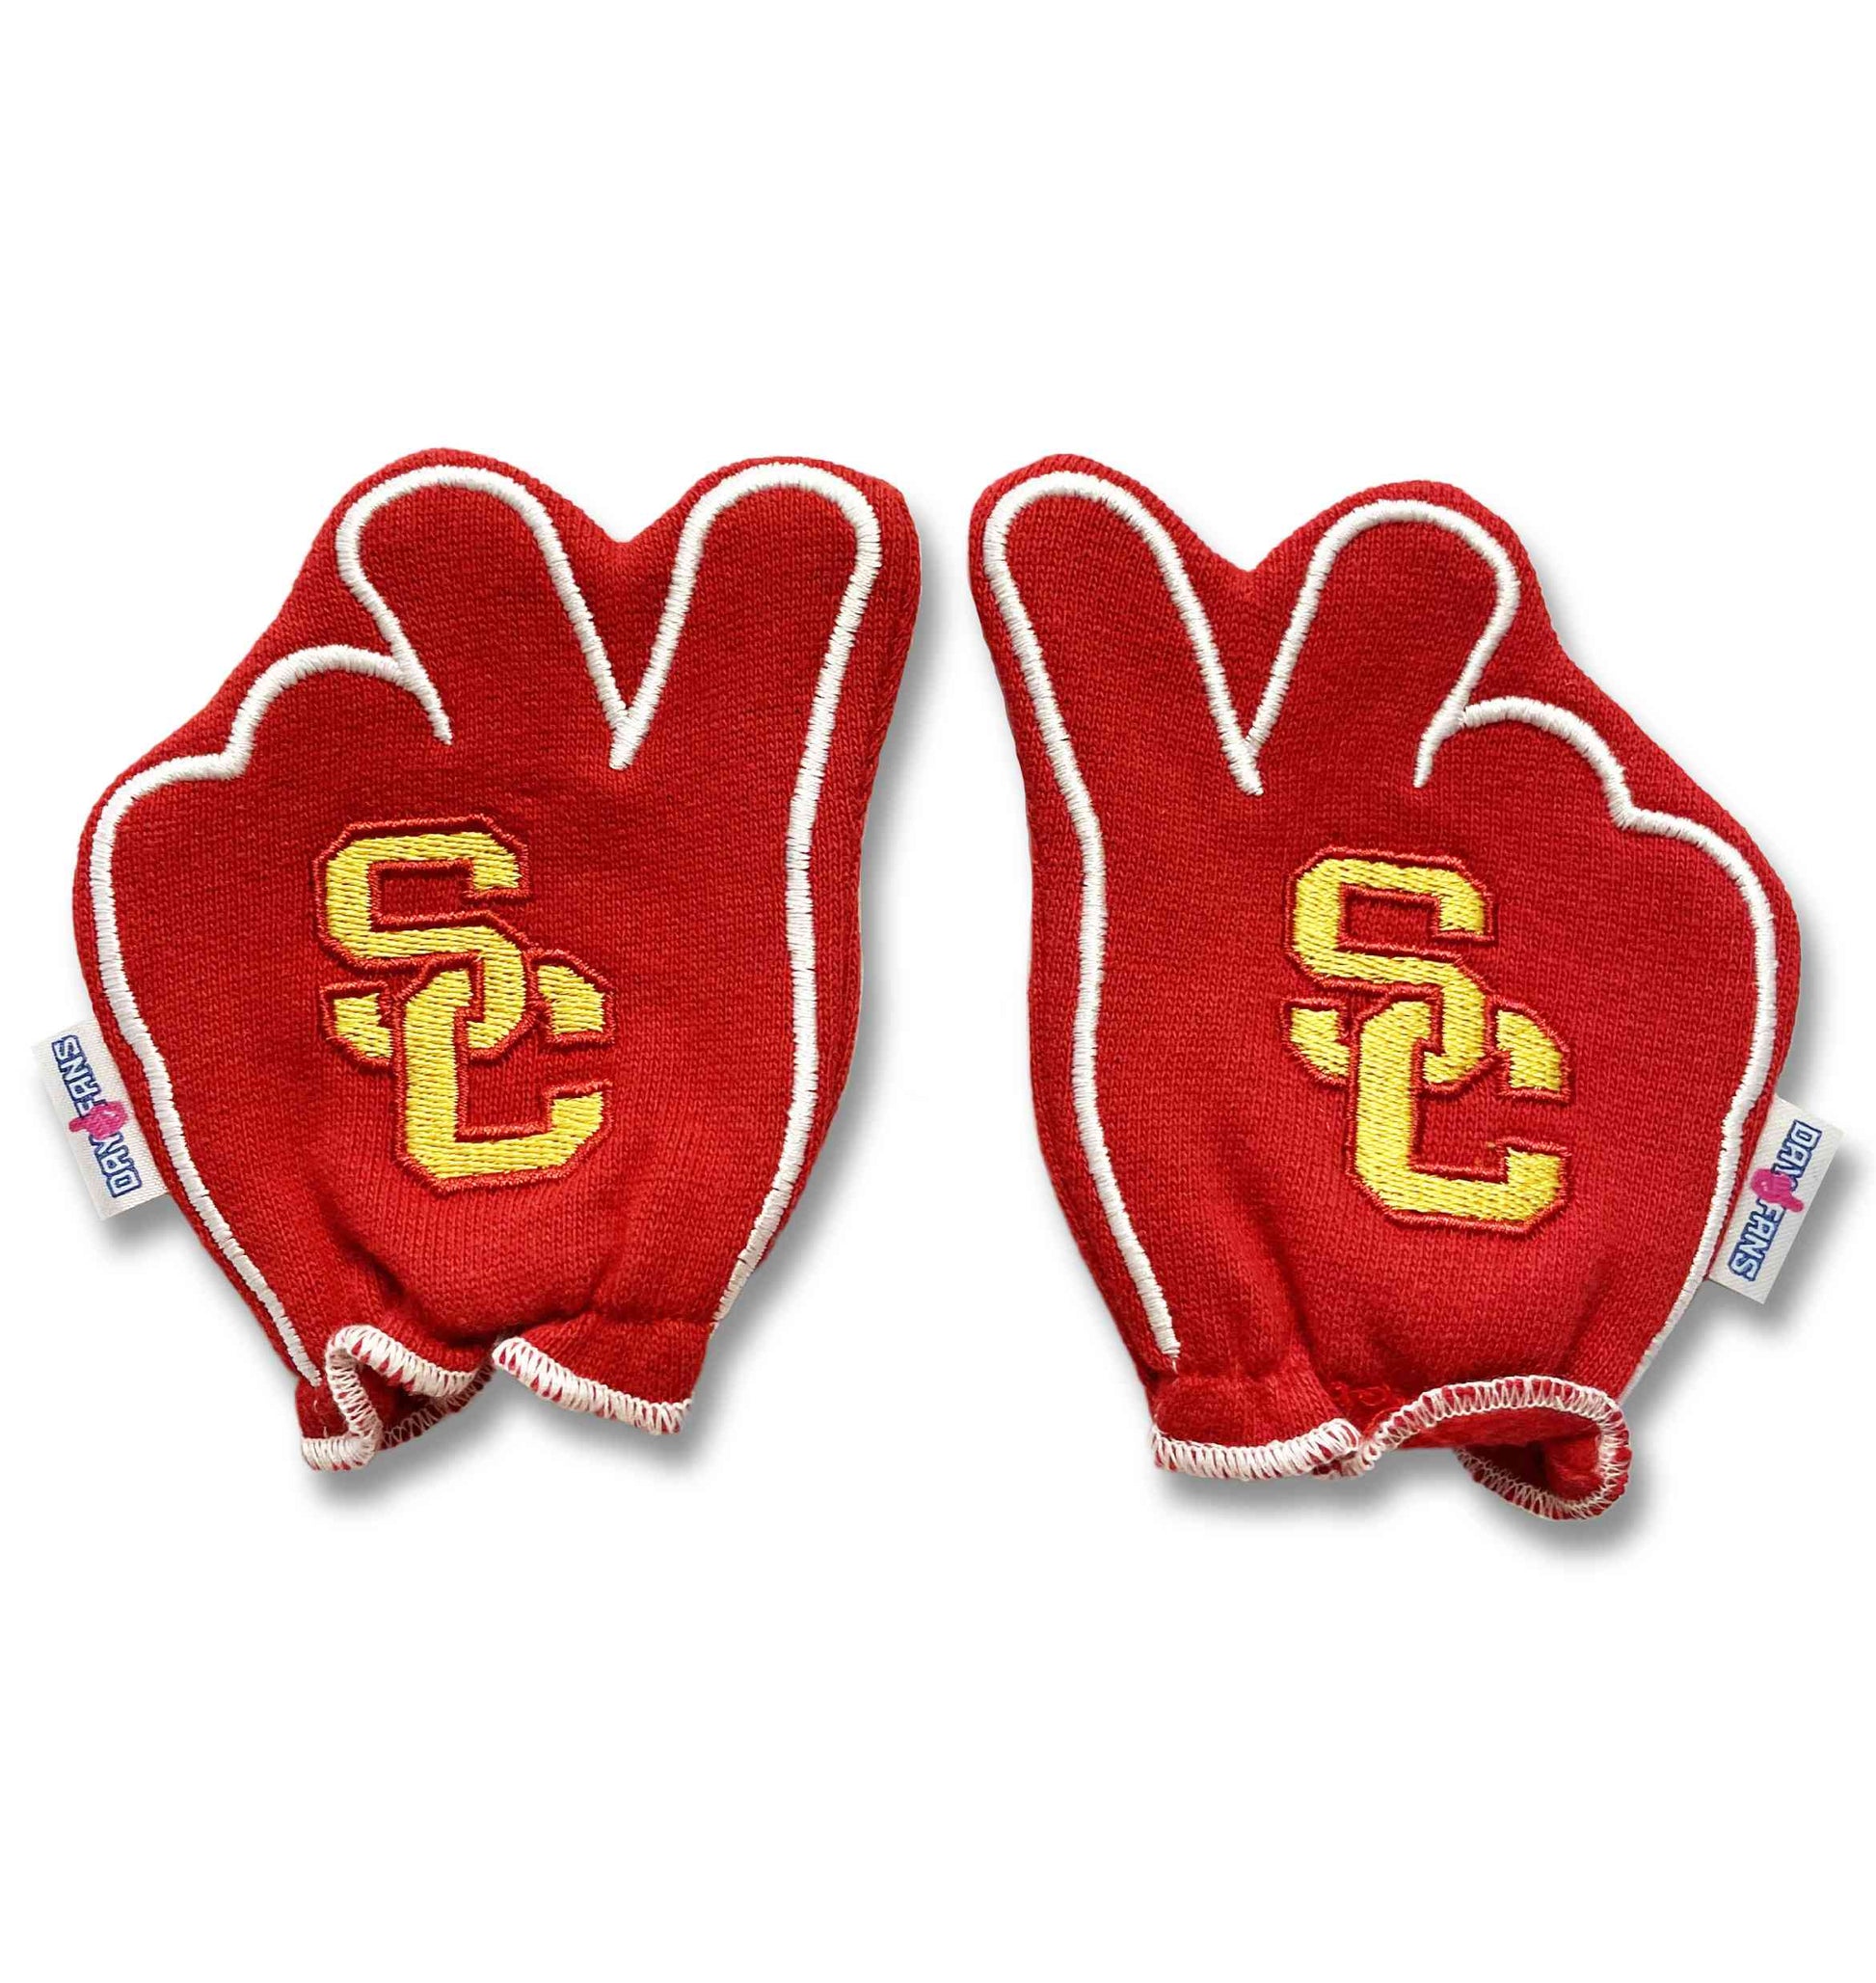 USC Fight On FanMitts Baby Mittens Cardinal Red Back Pair